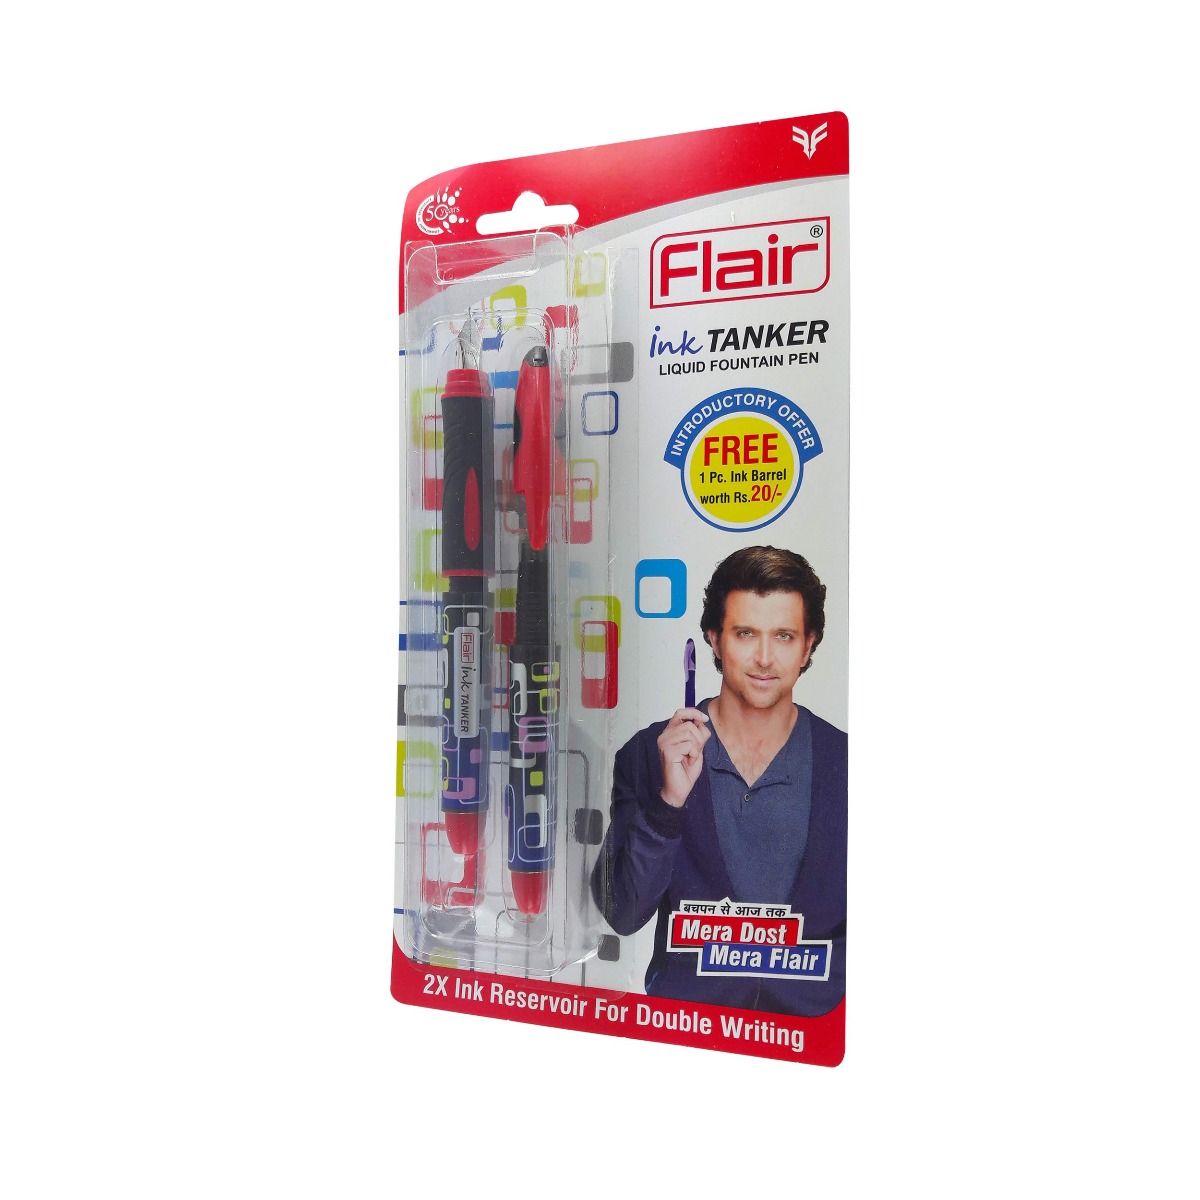 Flair ink Tanker Model: 12833 Black color body with Red color clip medium tip with free ink Barrel fountain pen